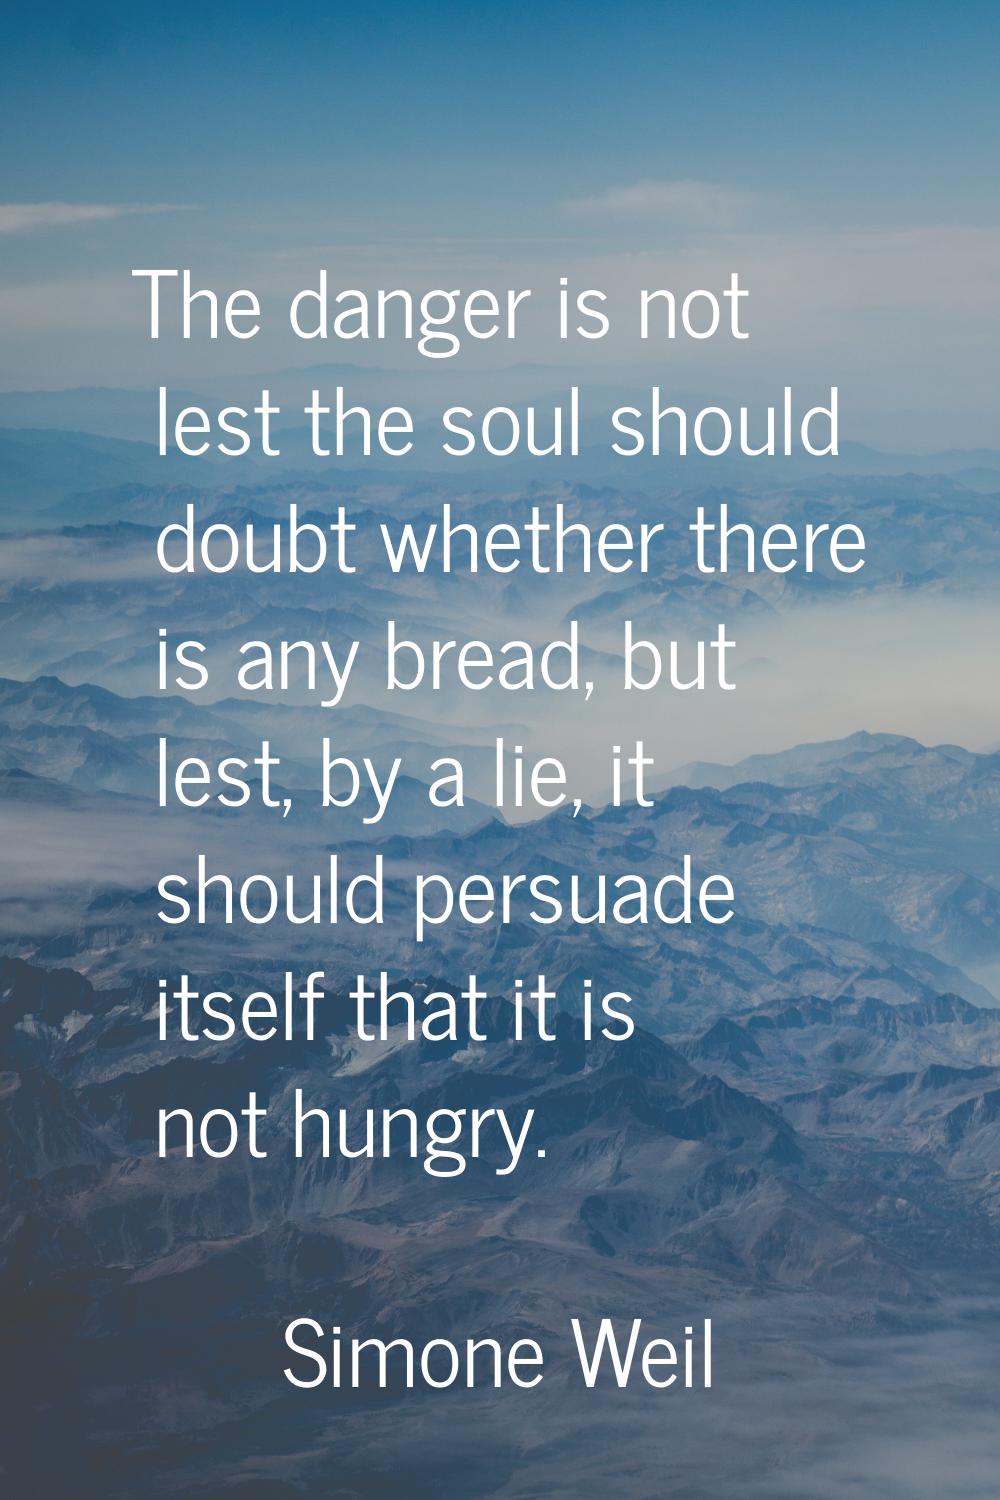 The danger is not lest the soul should doubt whether there is any bread, but lest, by a lie, it sho